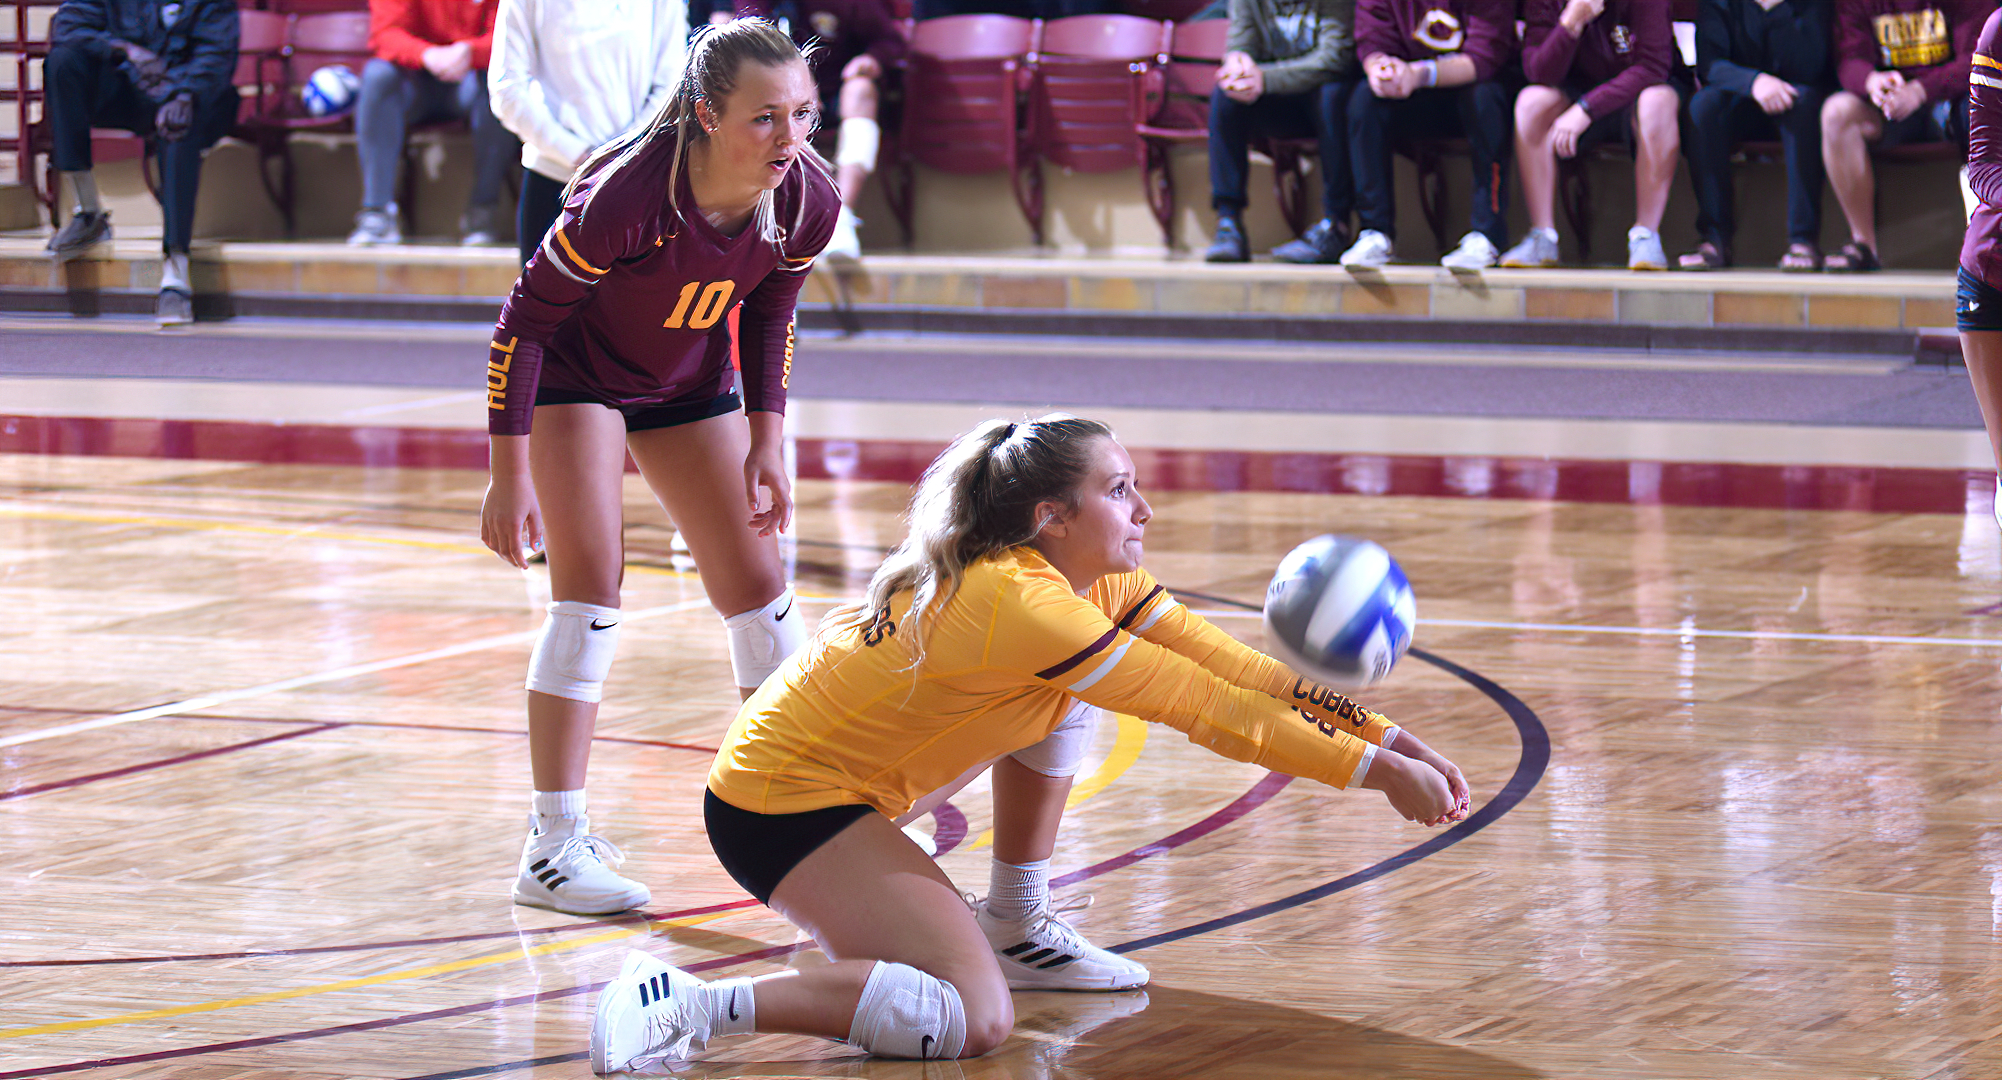 Junior Chloe Markovic had a team-high 86 digs in the Cobbers' four matches at the season-opening Central/Grinnell Invite.